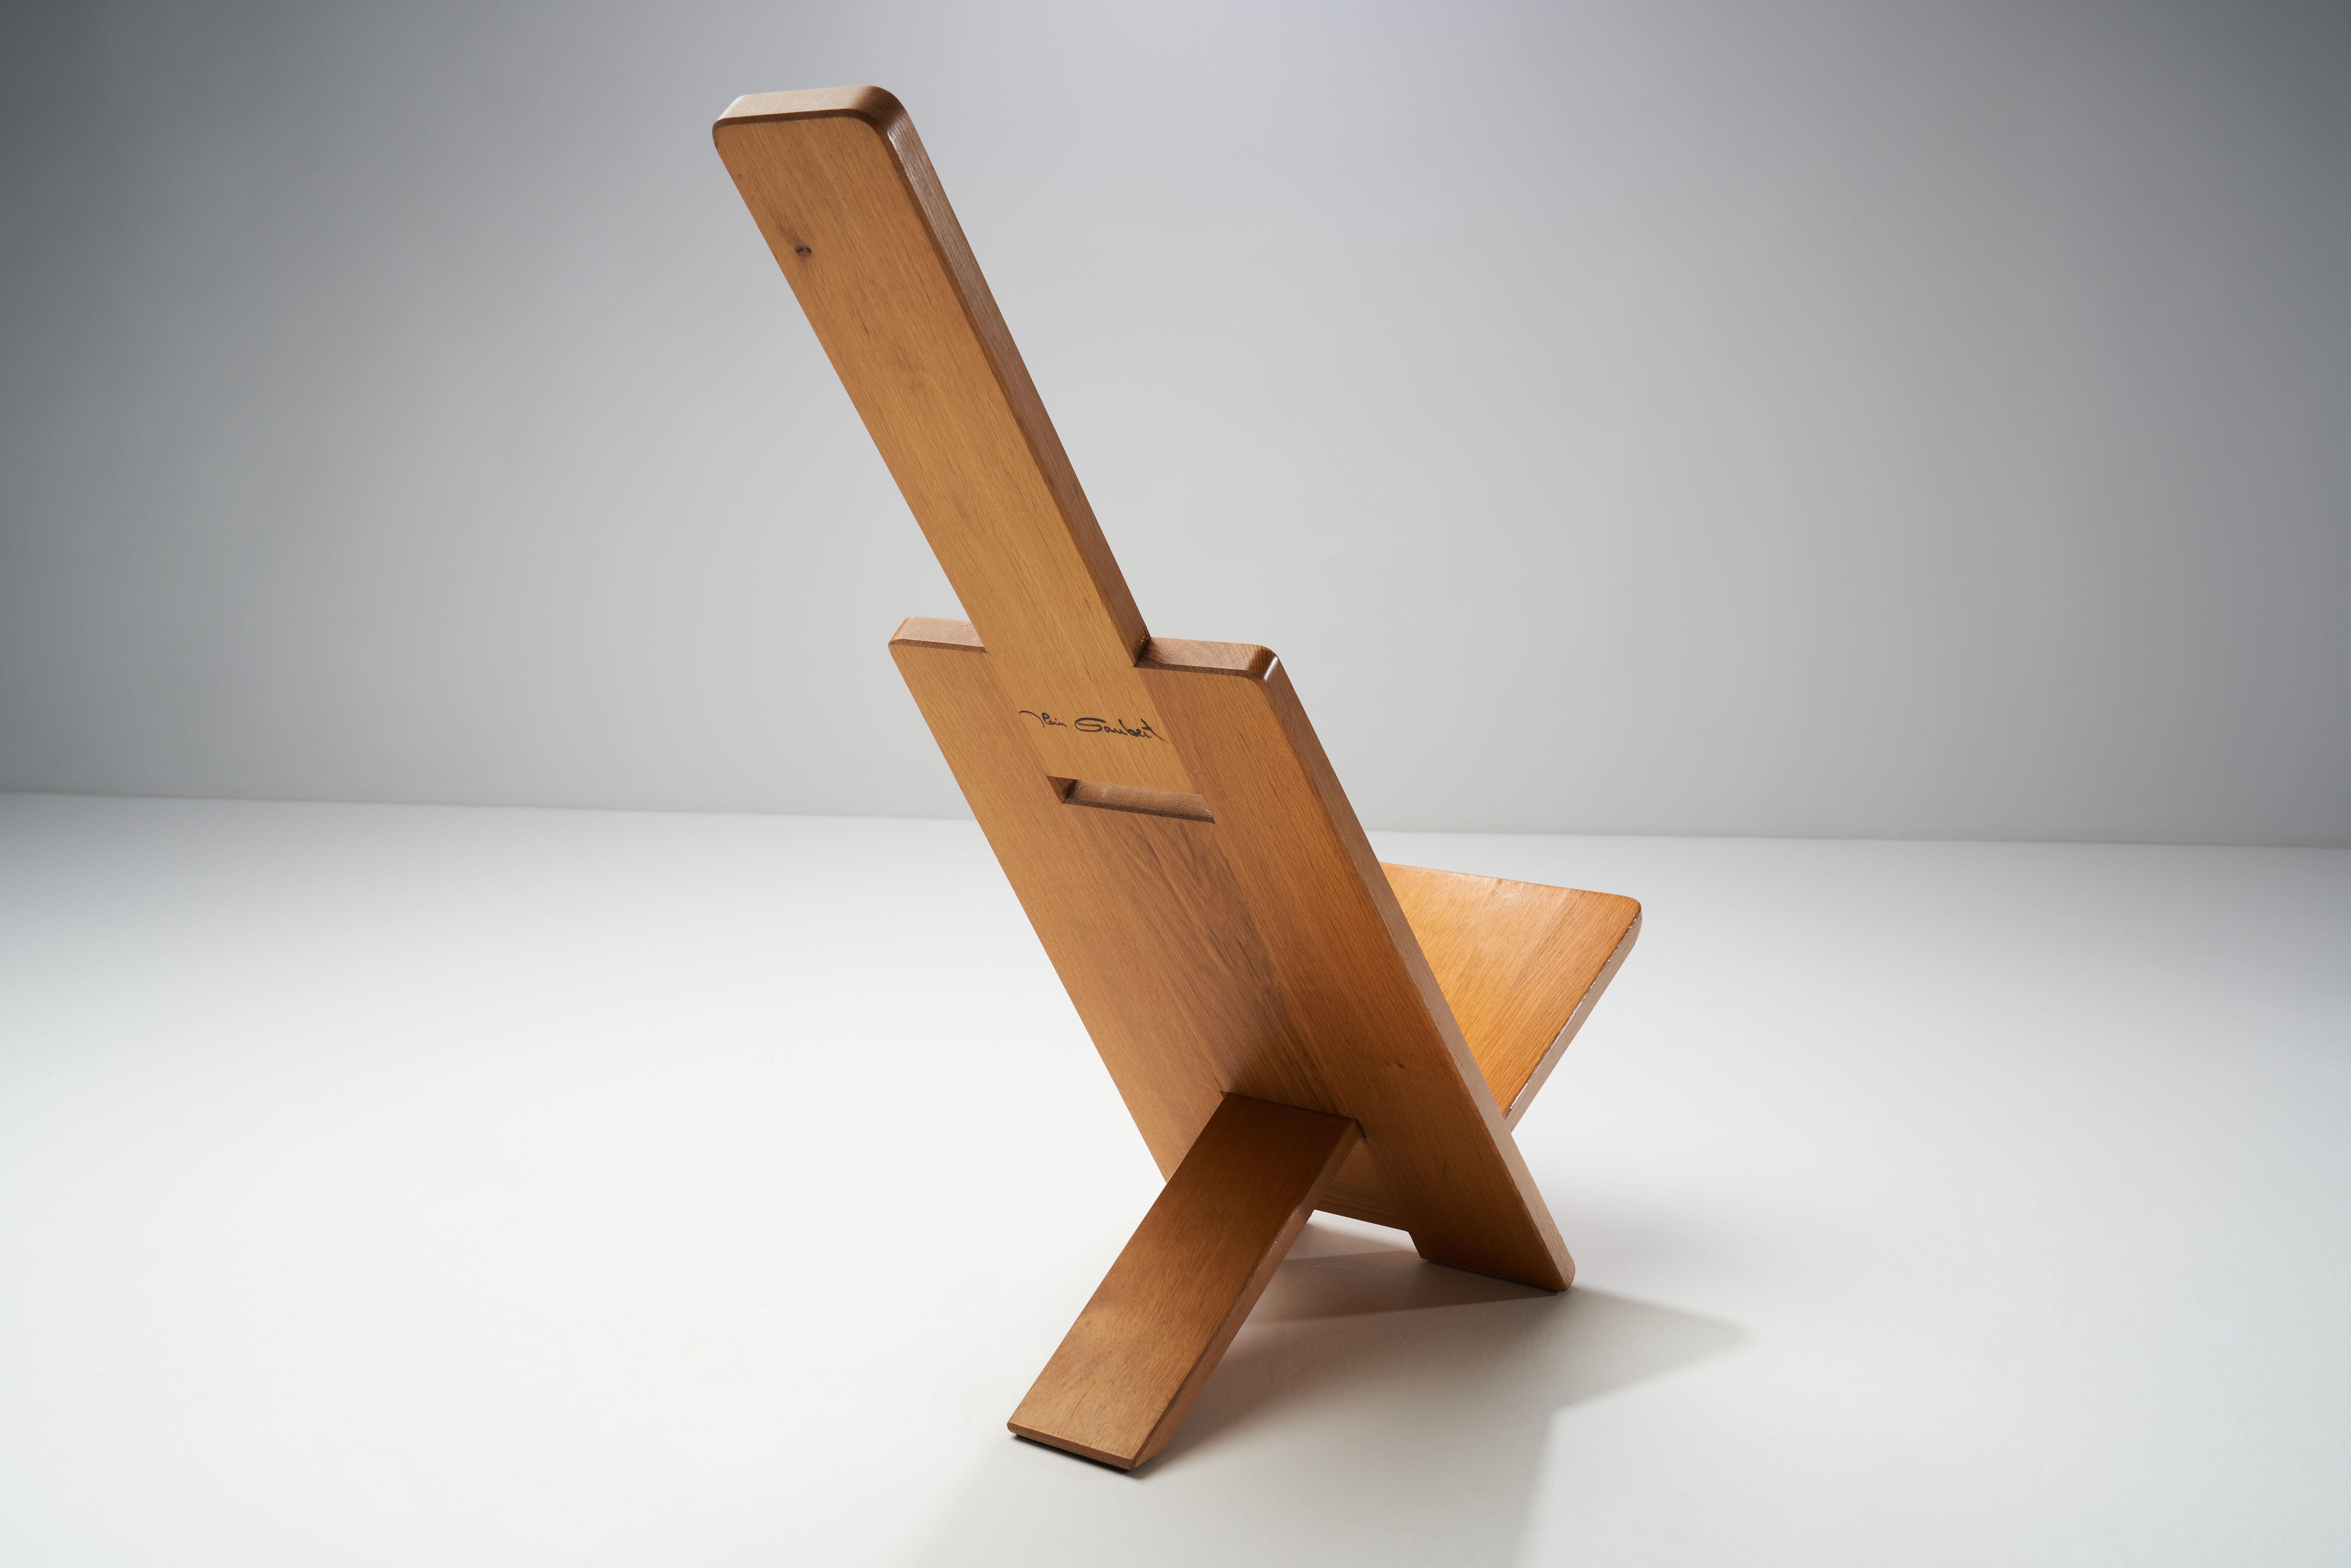 This chair by French designer, Alain Gaubert is an eye-catching nod to Minimalist design. The construction is as ingeniously simple as it is visually striking.

The chair is made of solid oak, and was crafted using just two planes that intersect at